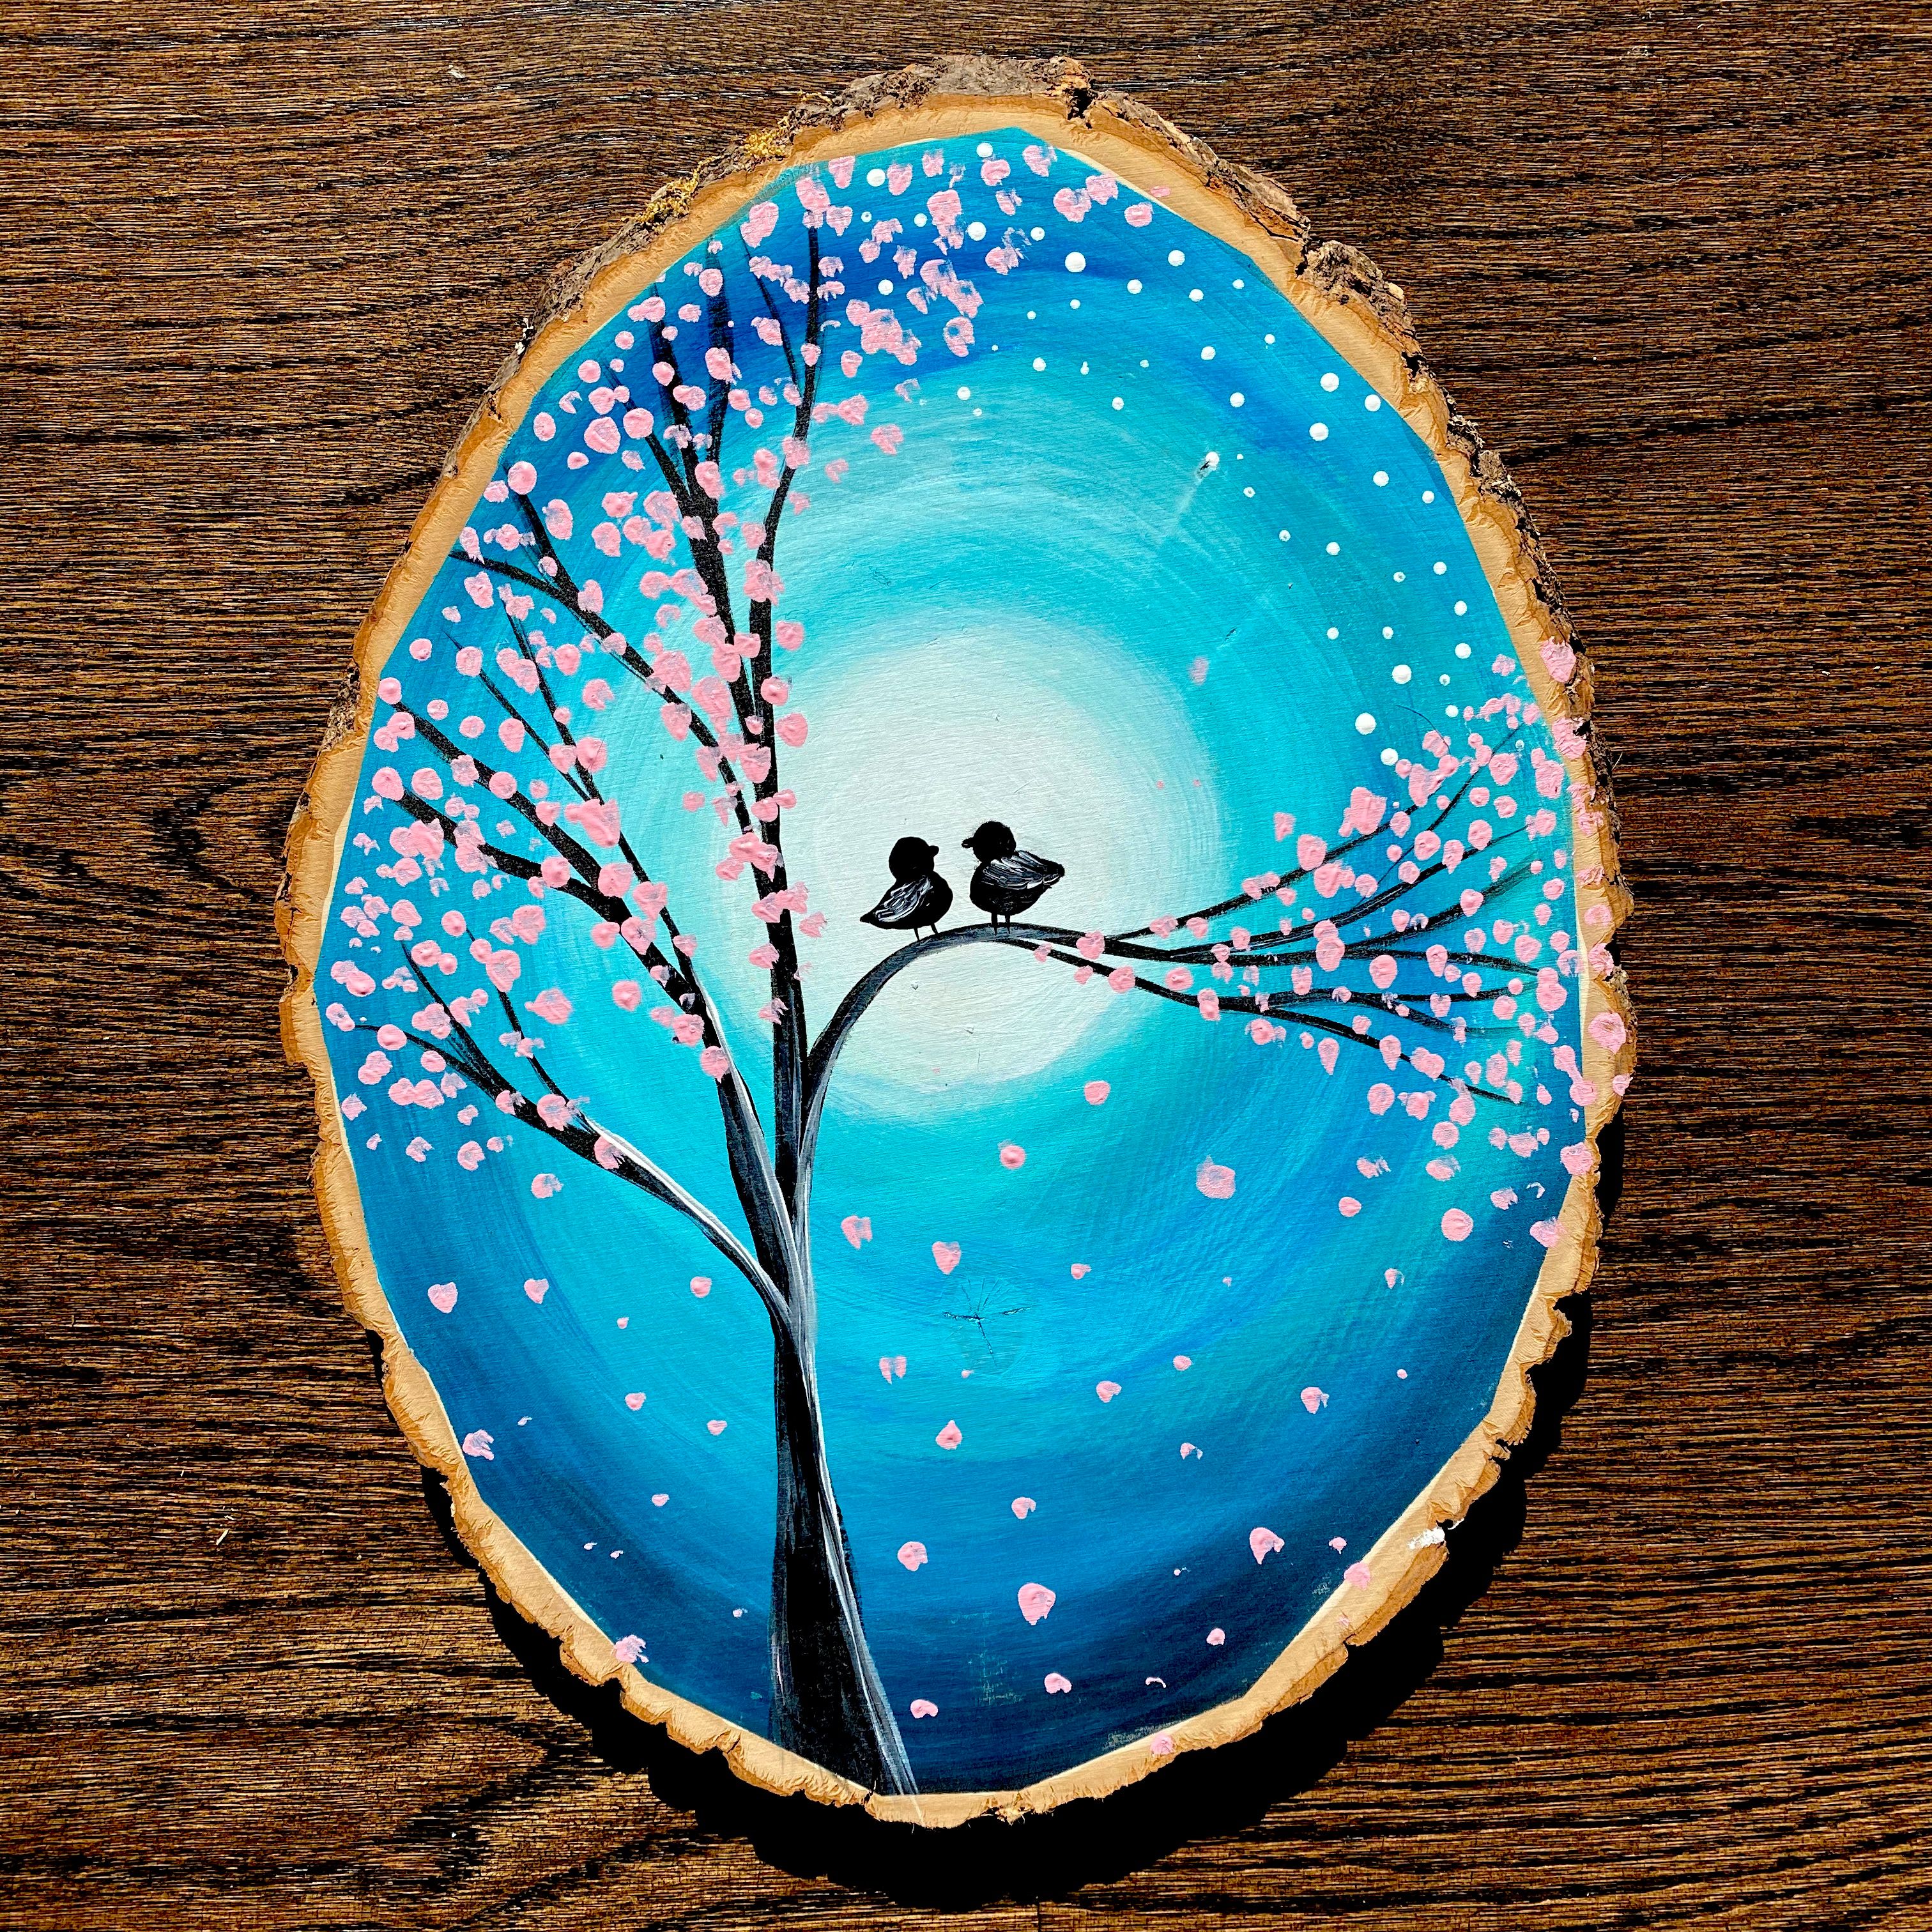 A Family Love Birds in The Cherry Blossom Tree Rustic Wood Slice experience project by Yaymaker